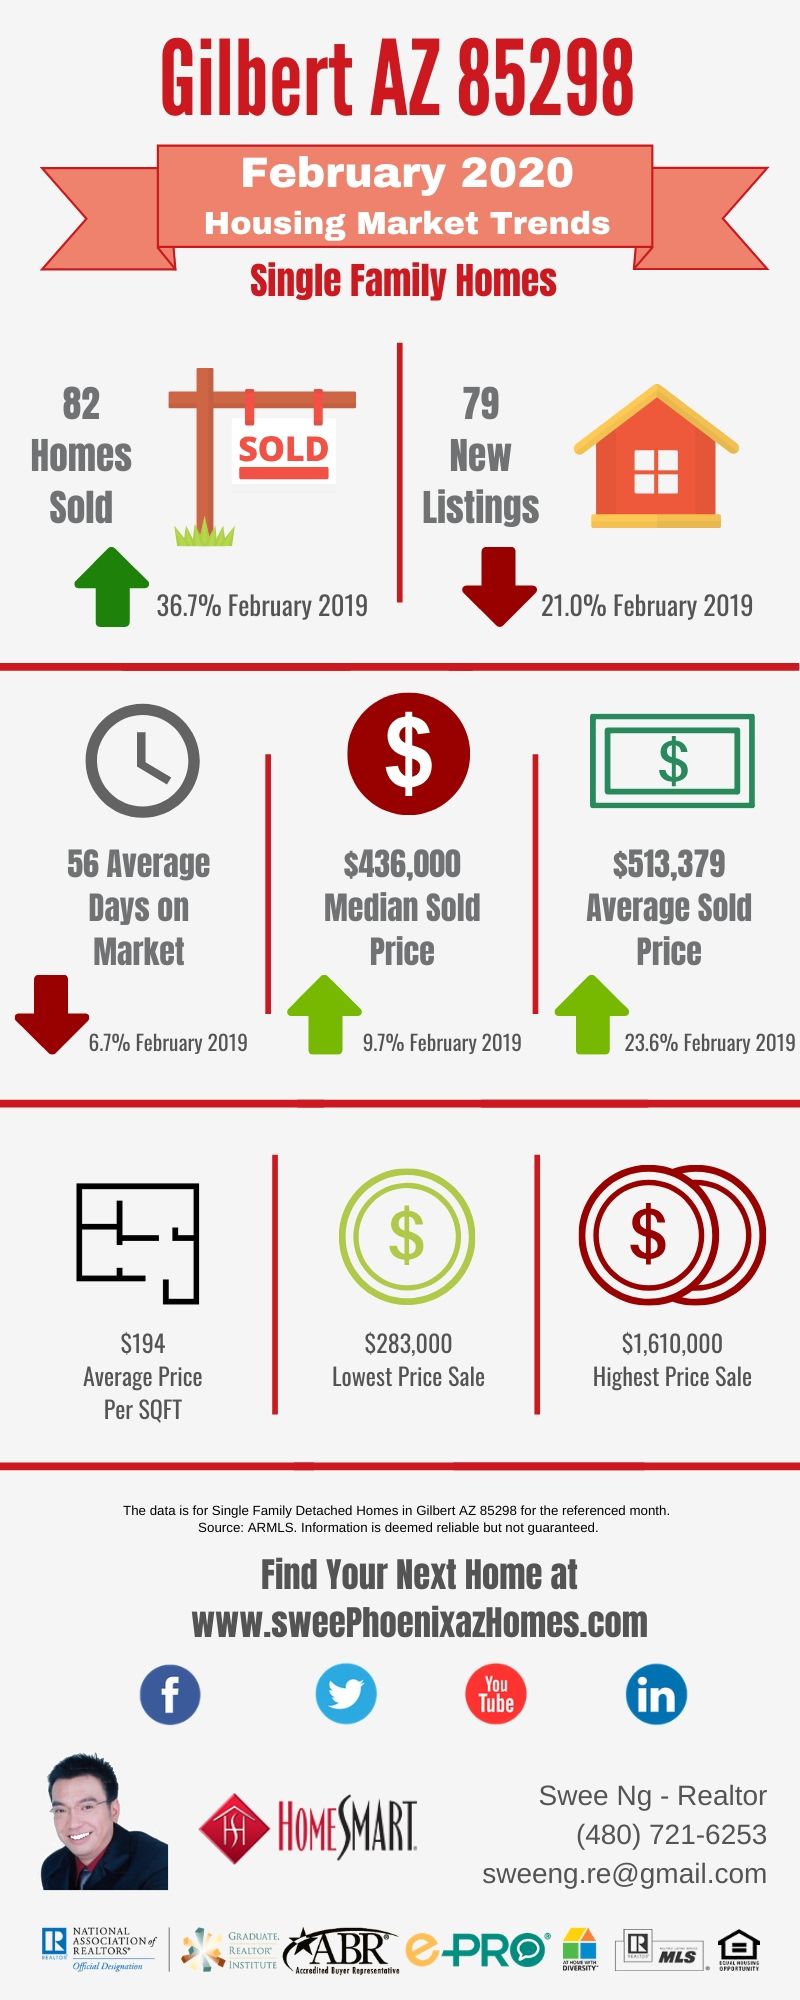 Gilbert AZ 85298 Housing Market Trends Report February 2020 by Swee Ng, Real Estate and House Value